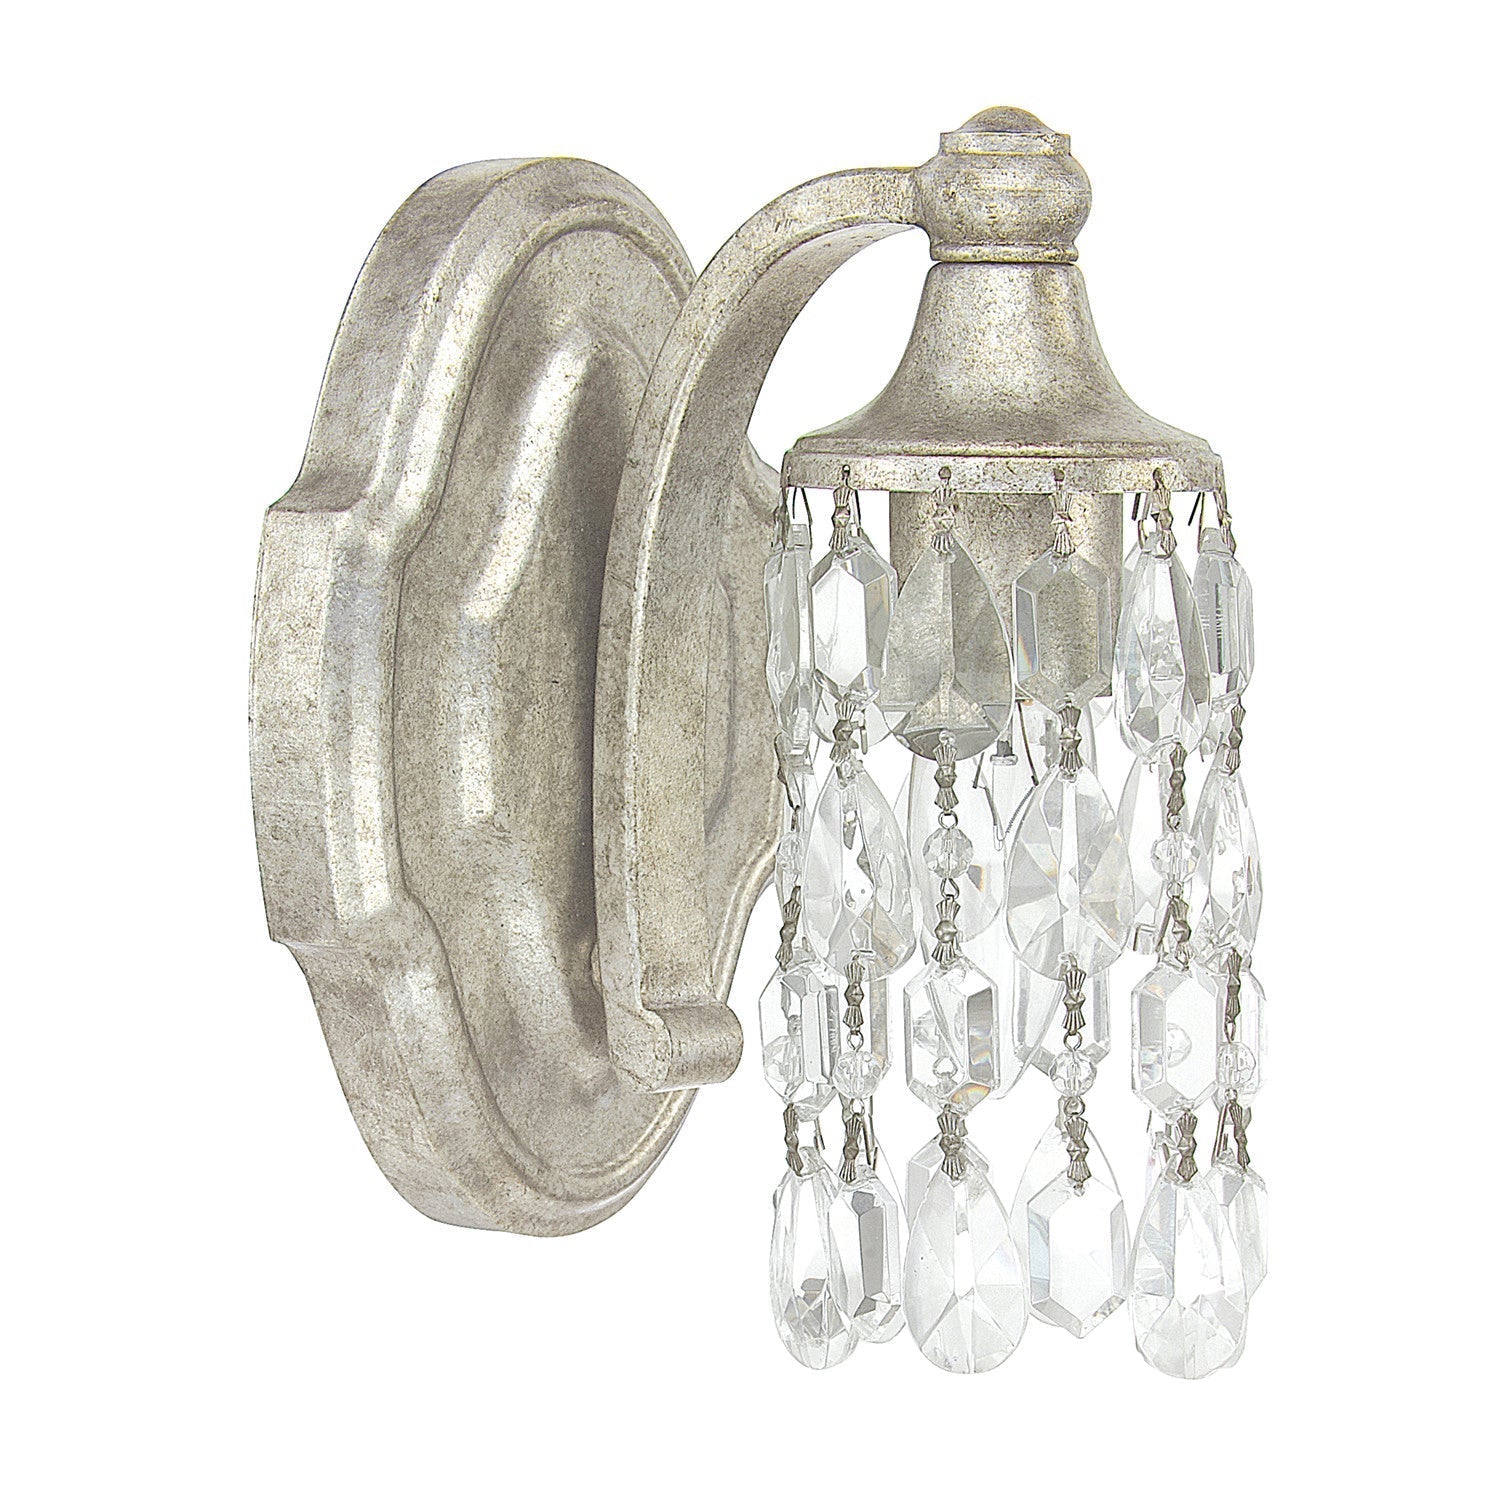 Capital Blakely 8521AS-CR Wall Sconce Light - Antique Silver